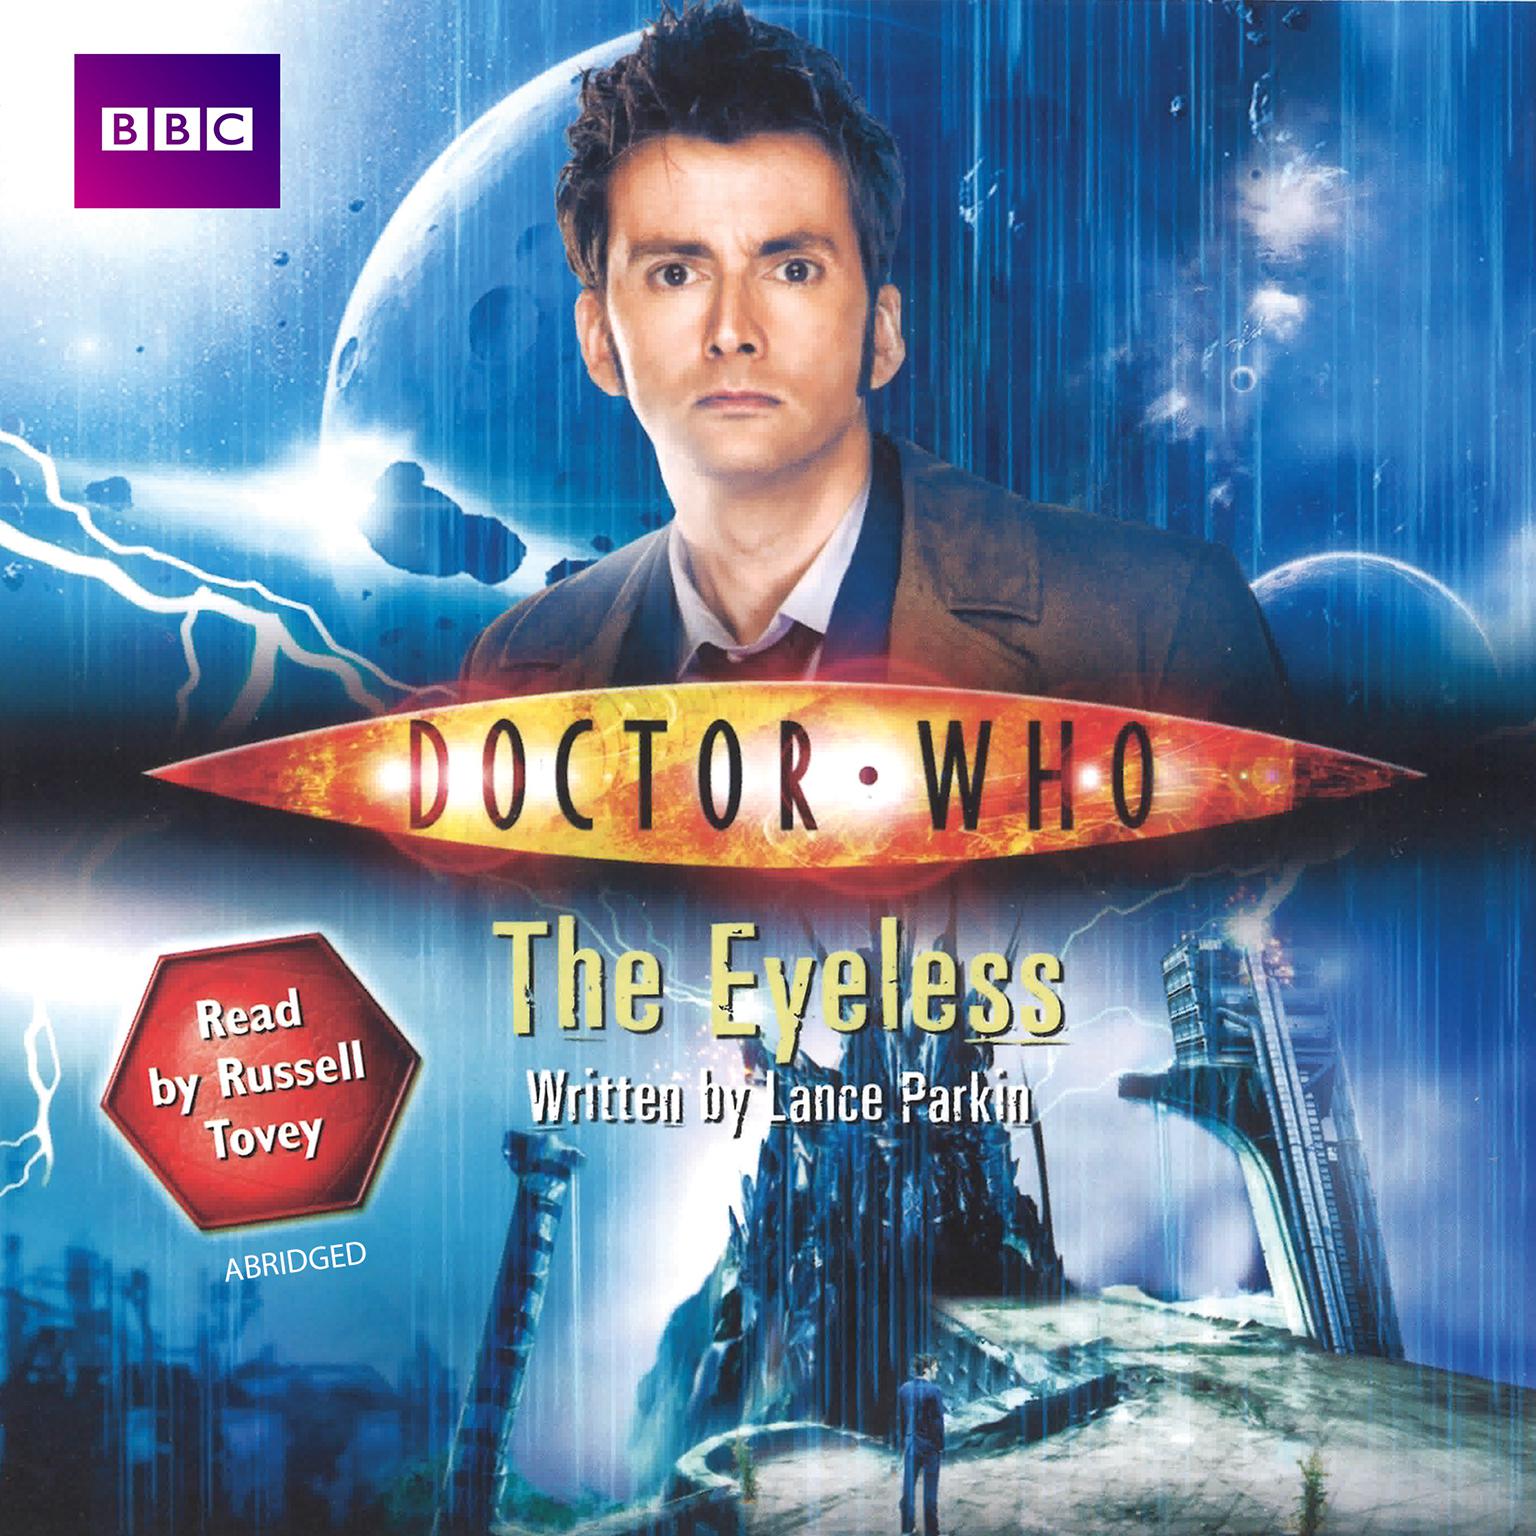 Doctor Who: The Eyeless (Abridged) Audiobook, by Lance Parkin